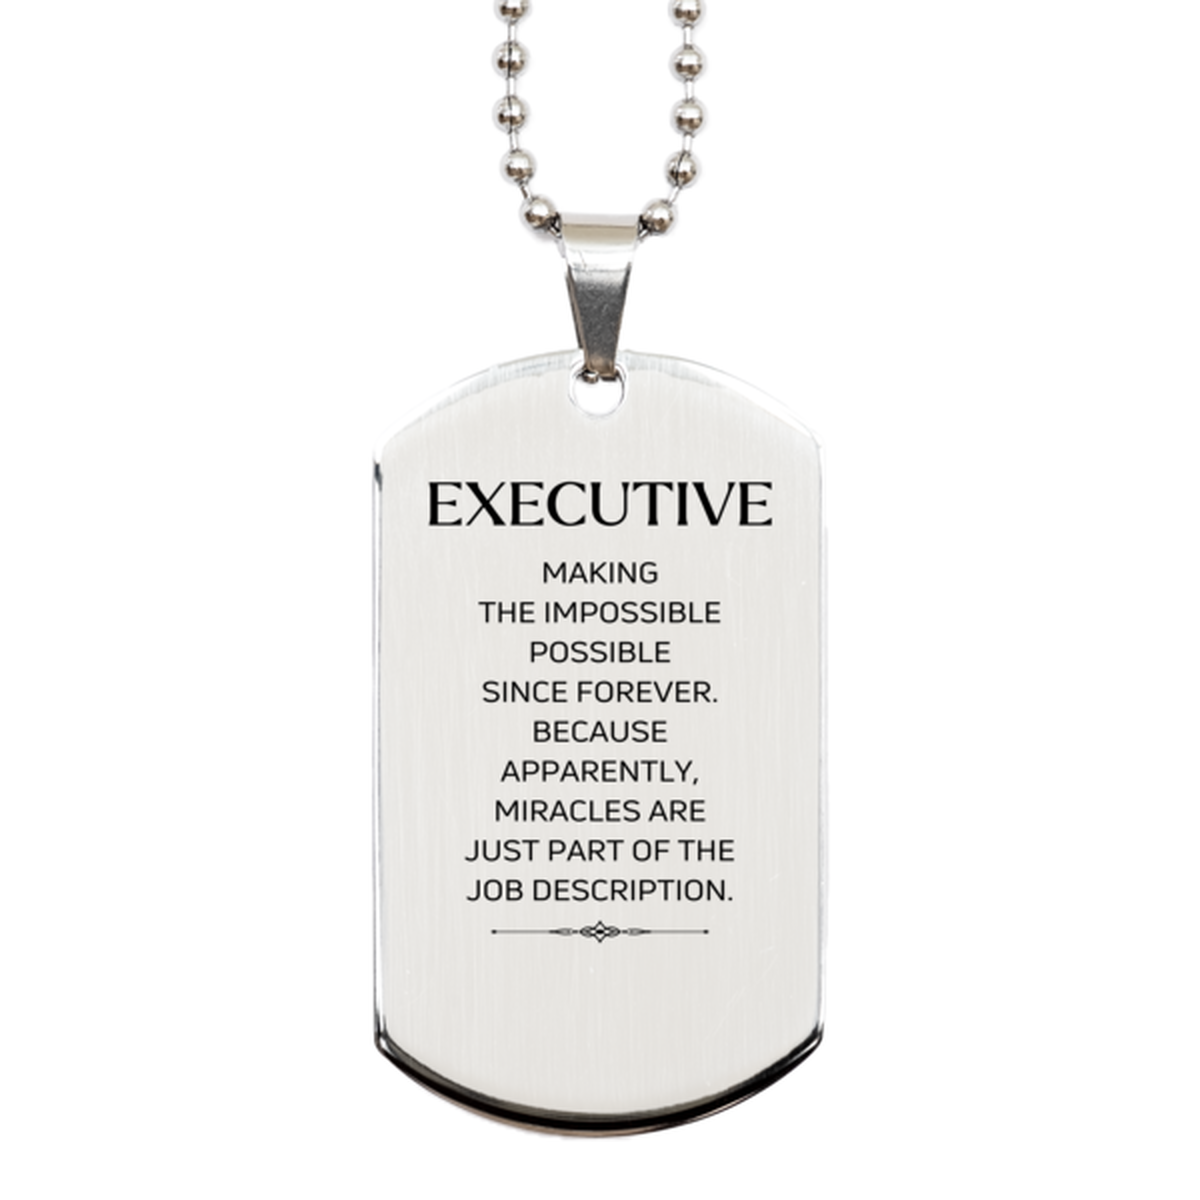 Funny Executive Gifts, Miracles are just part of the job description, Inspirational Birthday Silver Dog Tag For Executive, Men, Women, Coworkers, Friends, Boss